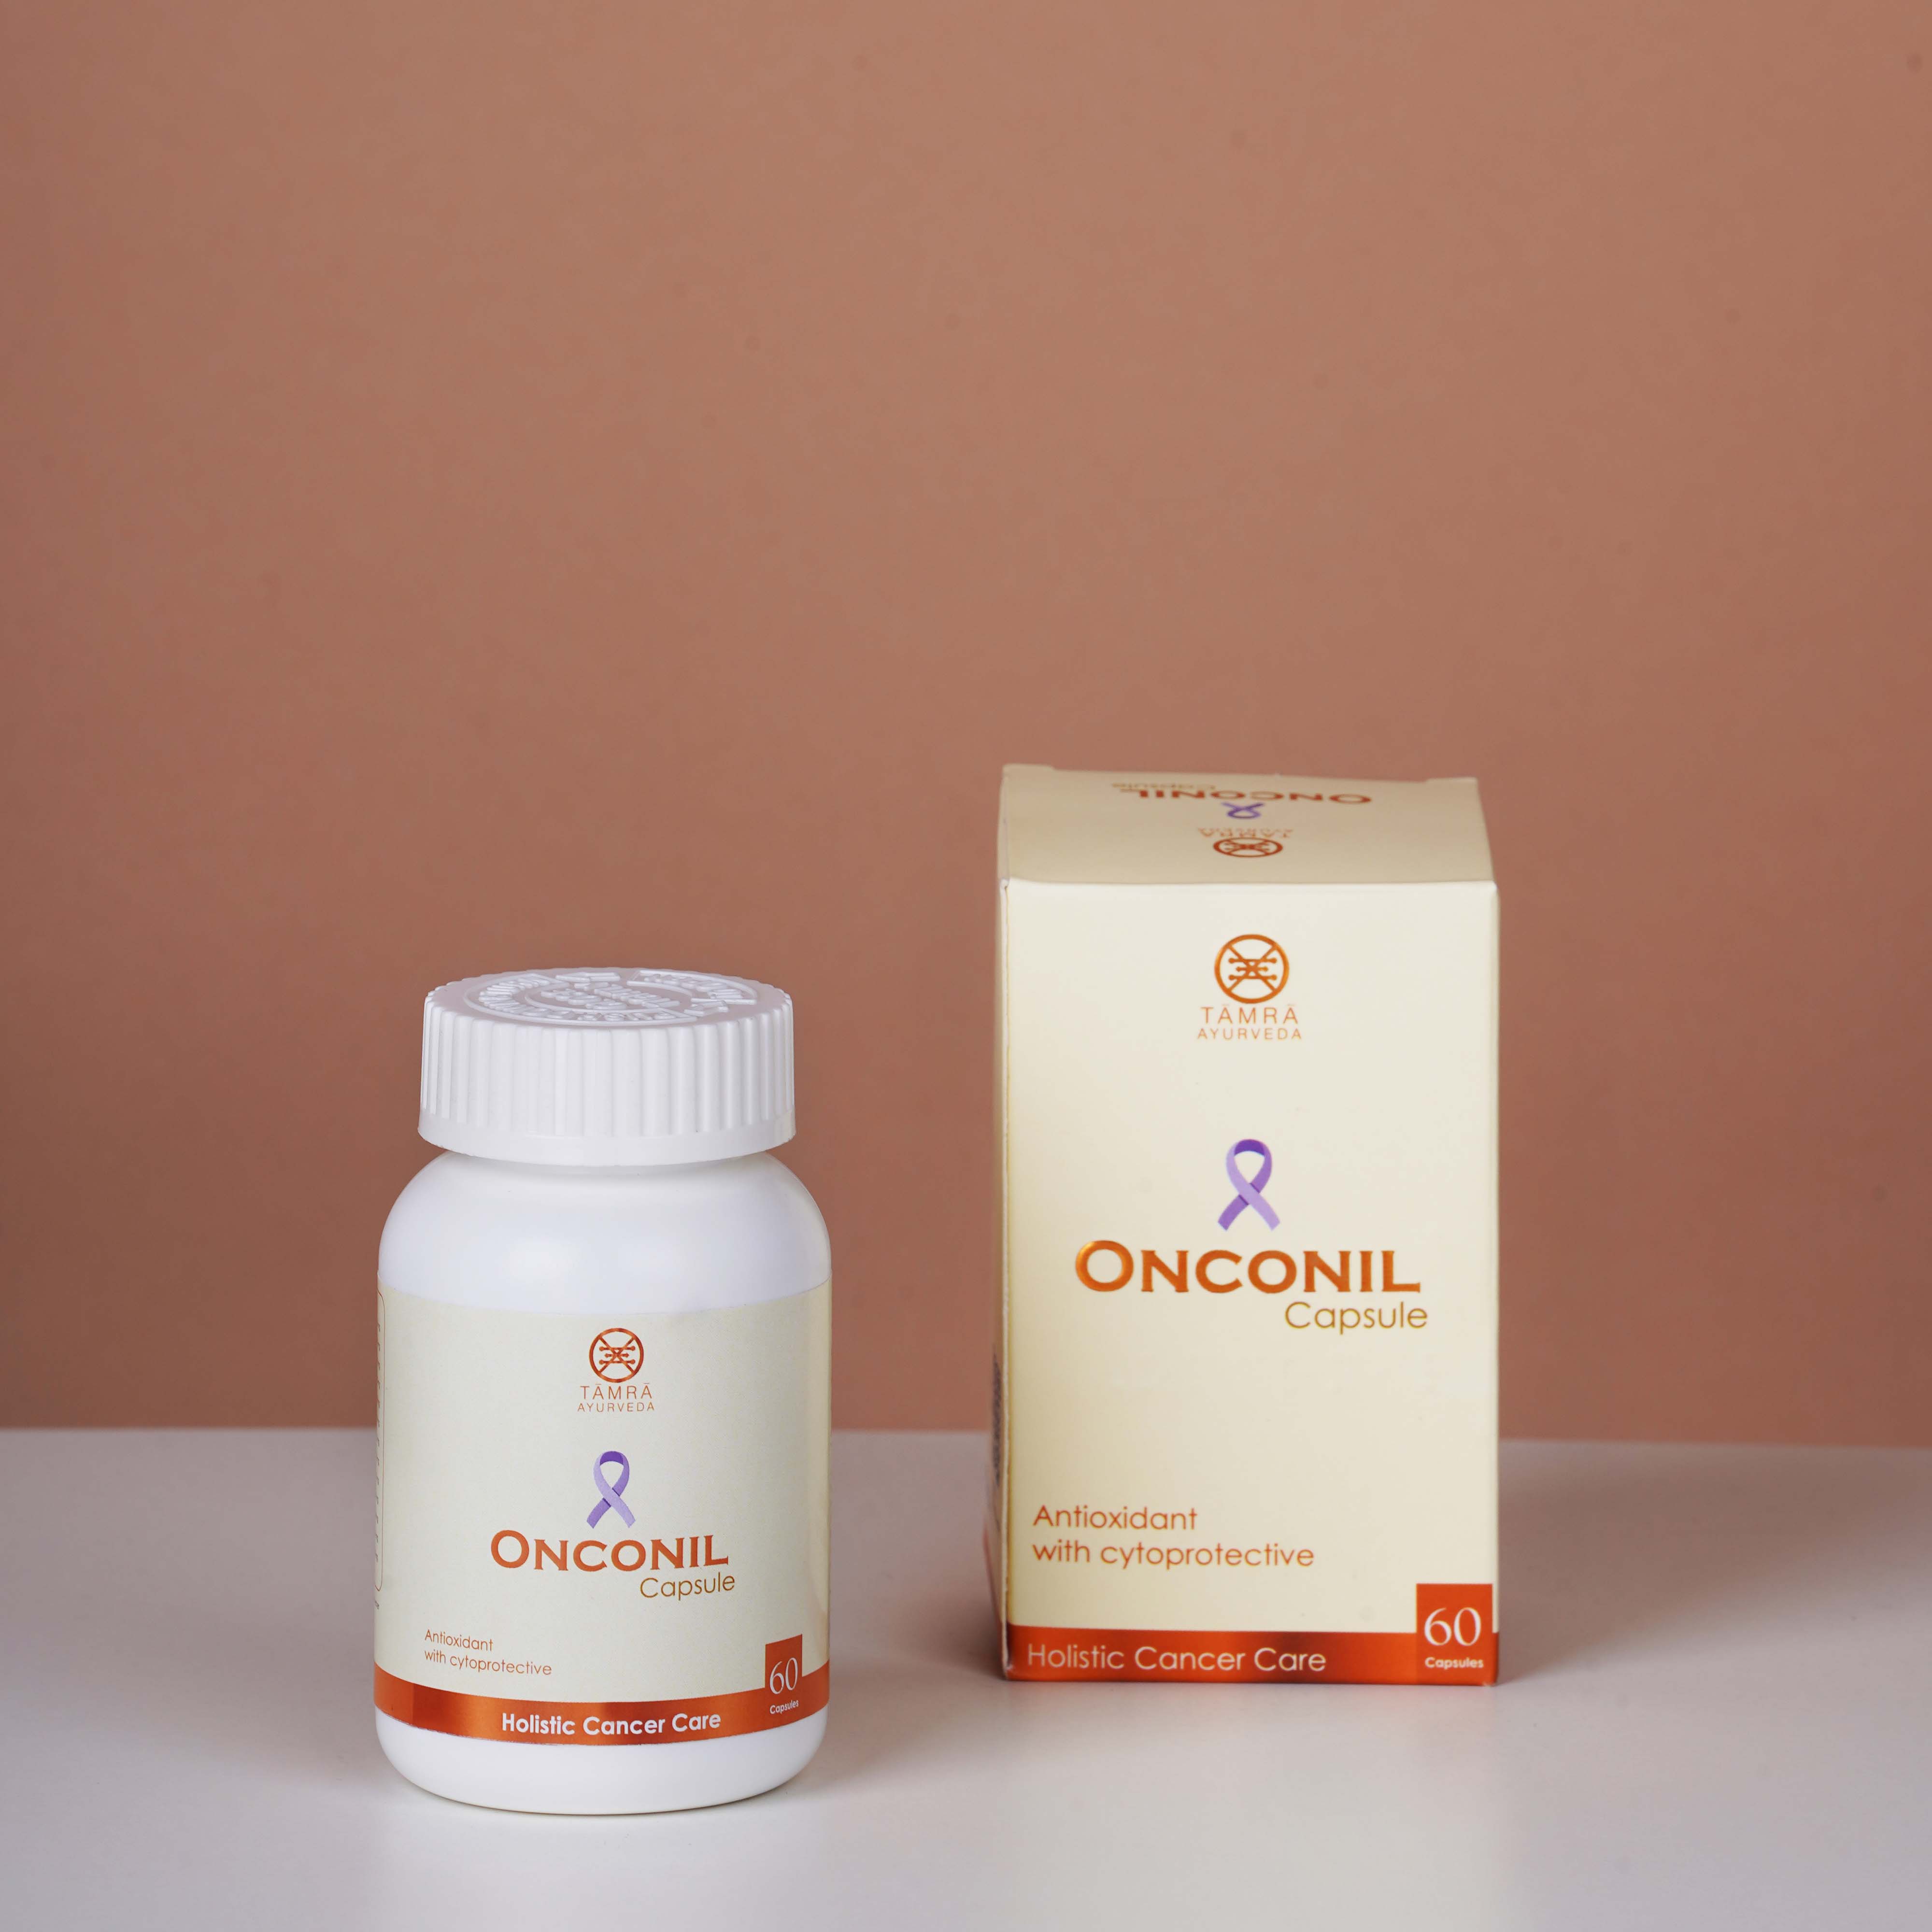 Onconil Capsule–For curing carcinogenic tumours & reducing inflammation